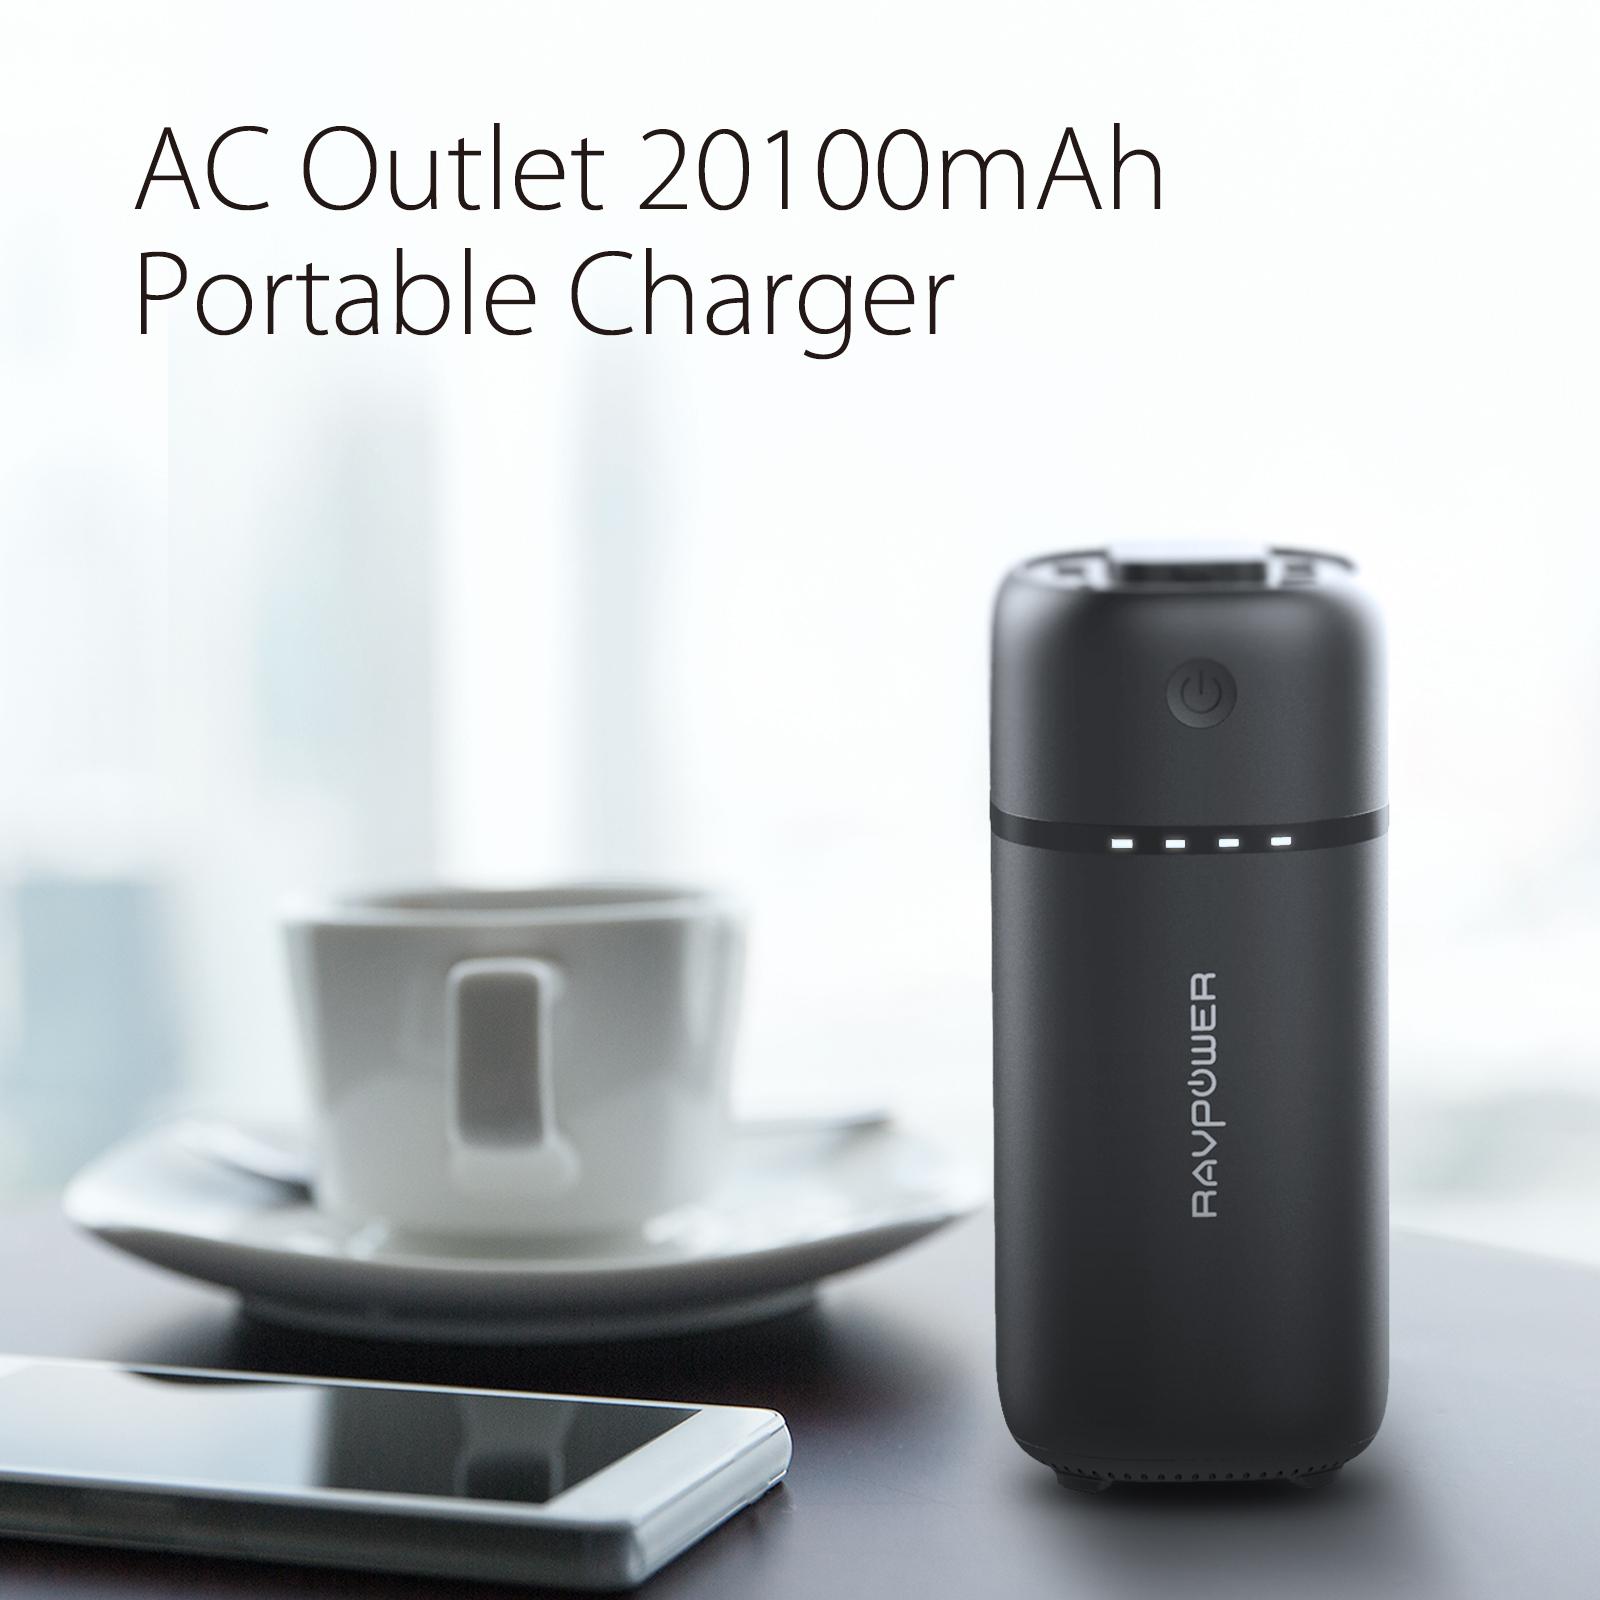 RAVPOWER 20100mAh Power Bank with 65W AC Outlet [RP-PB105]